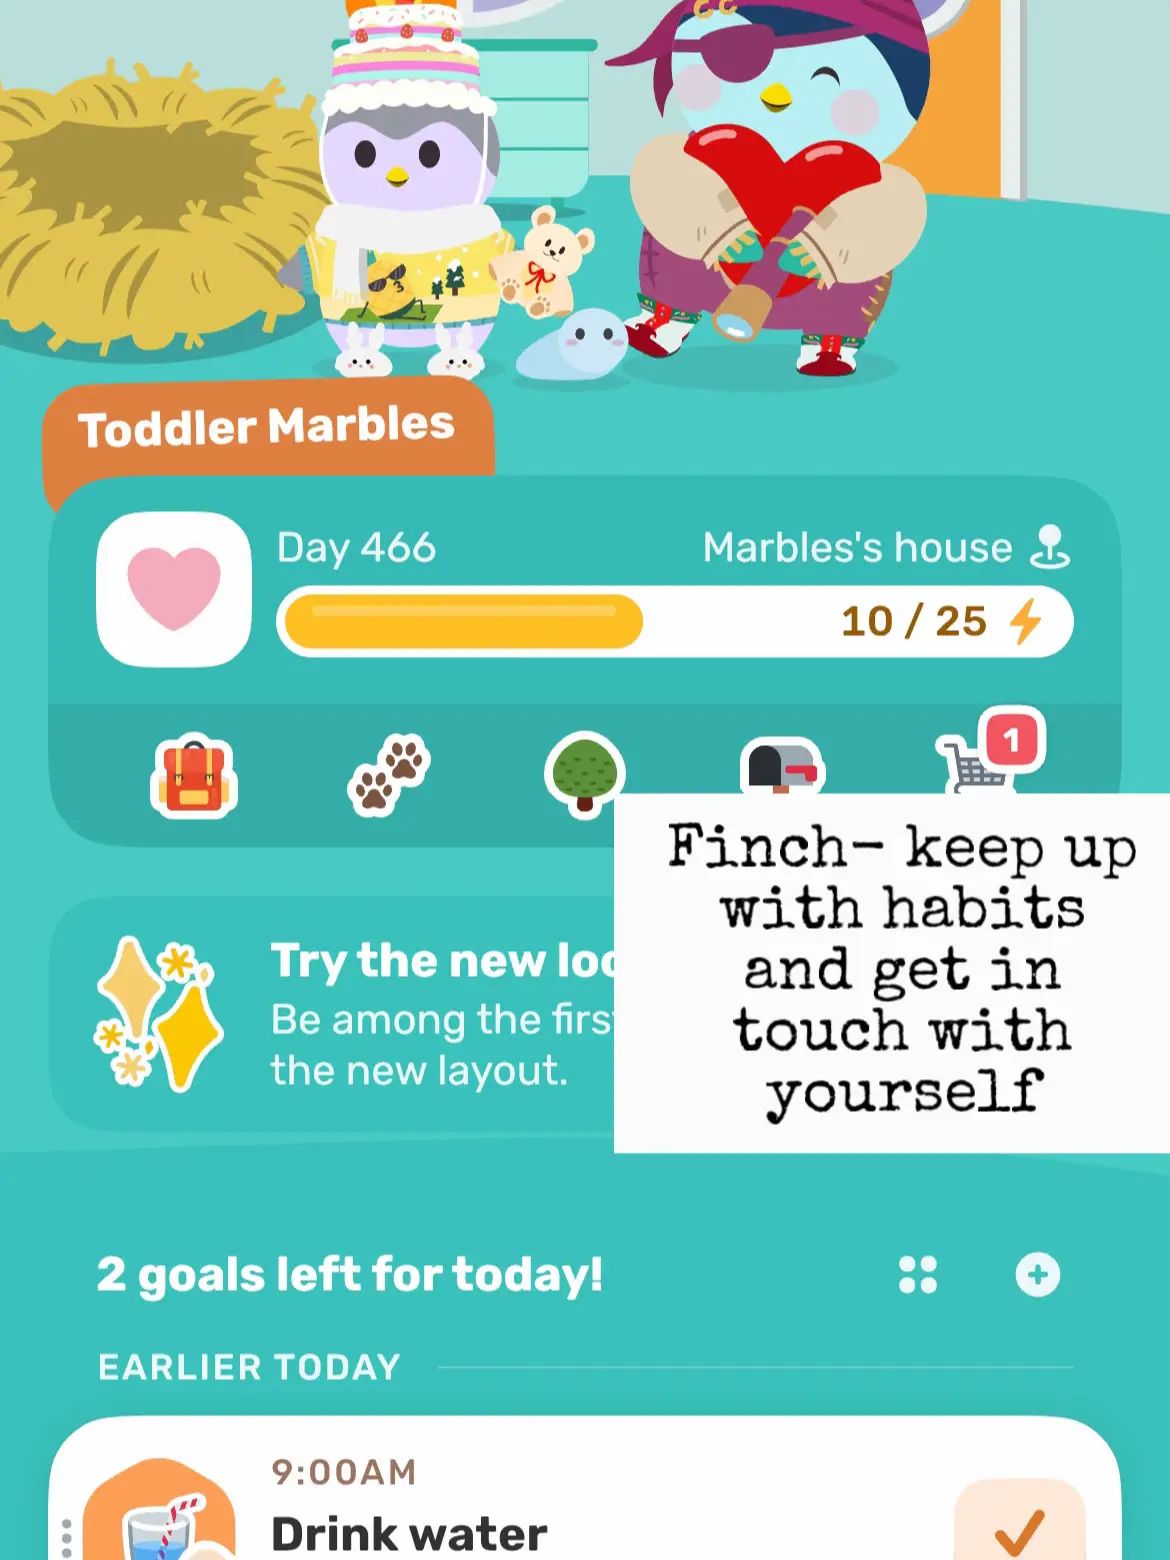  A screen showing a list of goals for a toddler